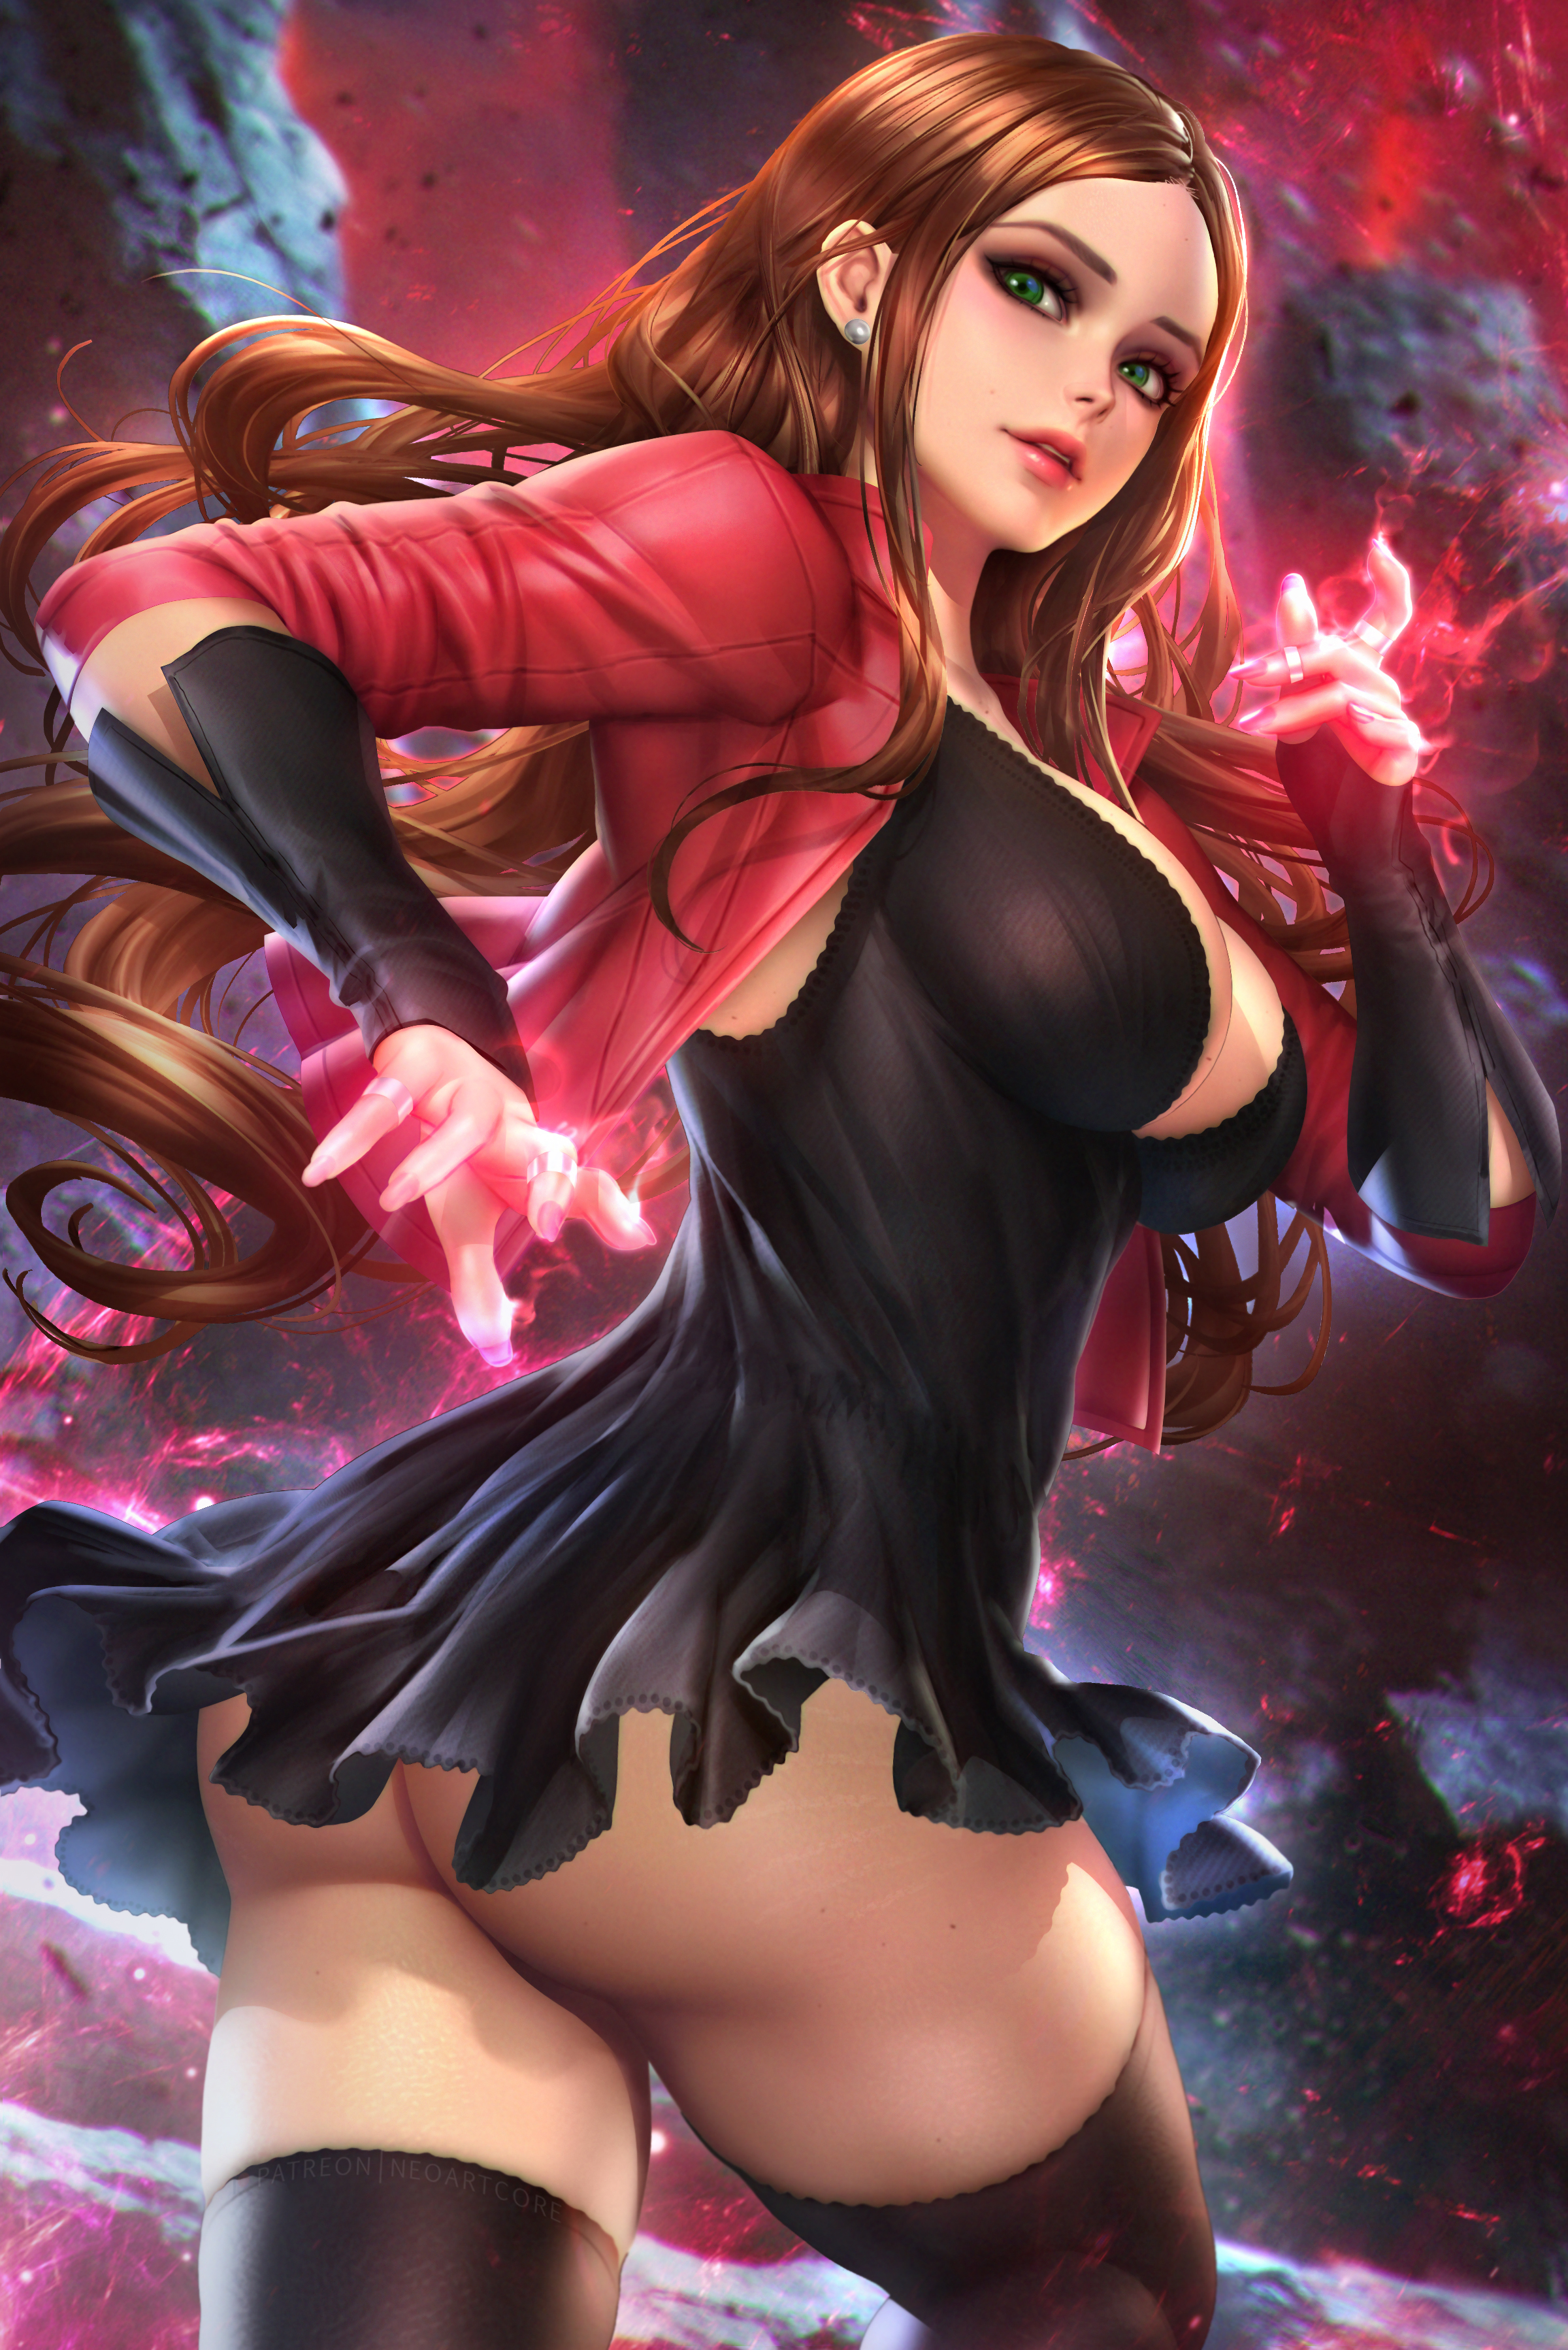 General 2400x3597 Scarlet Witch Marvel Comics superheroines brunette long hair green eyes looking at viewer parted lips low-angle jacket dress cleavage arm warmers ass upskirt thigh-highs stockings portrait display fantasy girl artwork drawing digital art fan art NeoArtCorE (artist) depth of field thick thigh